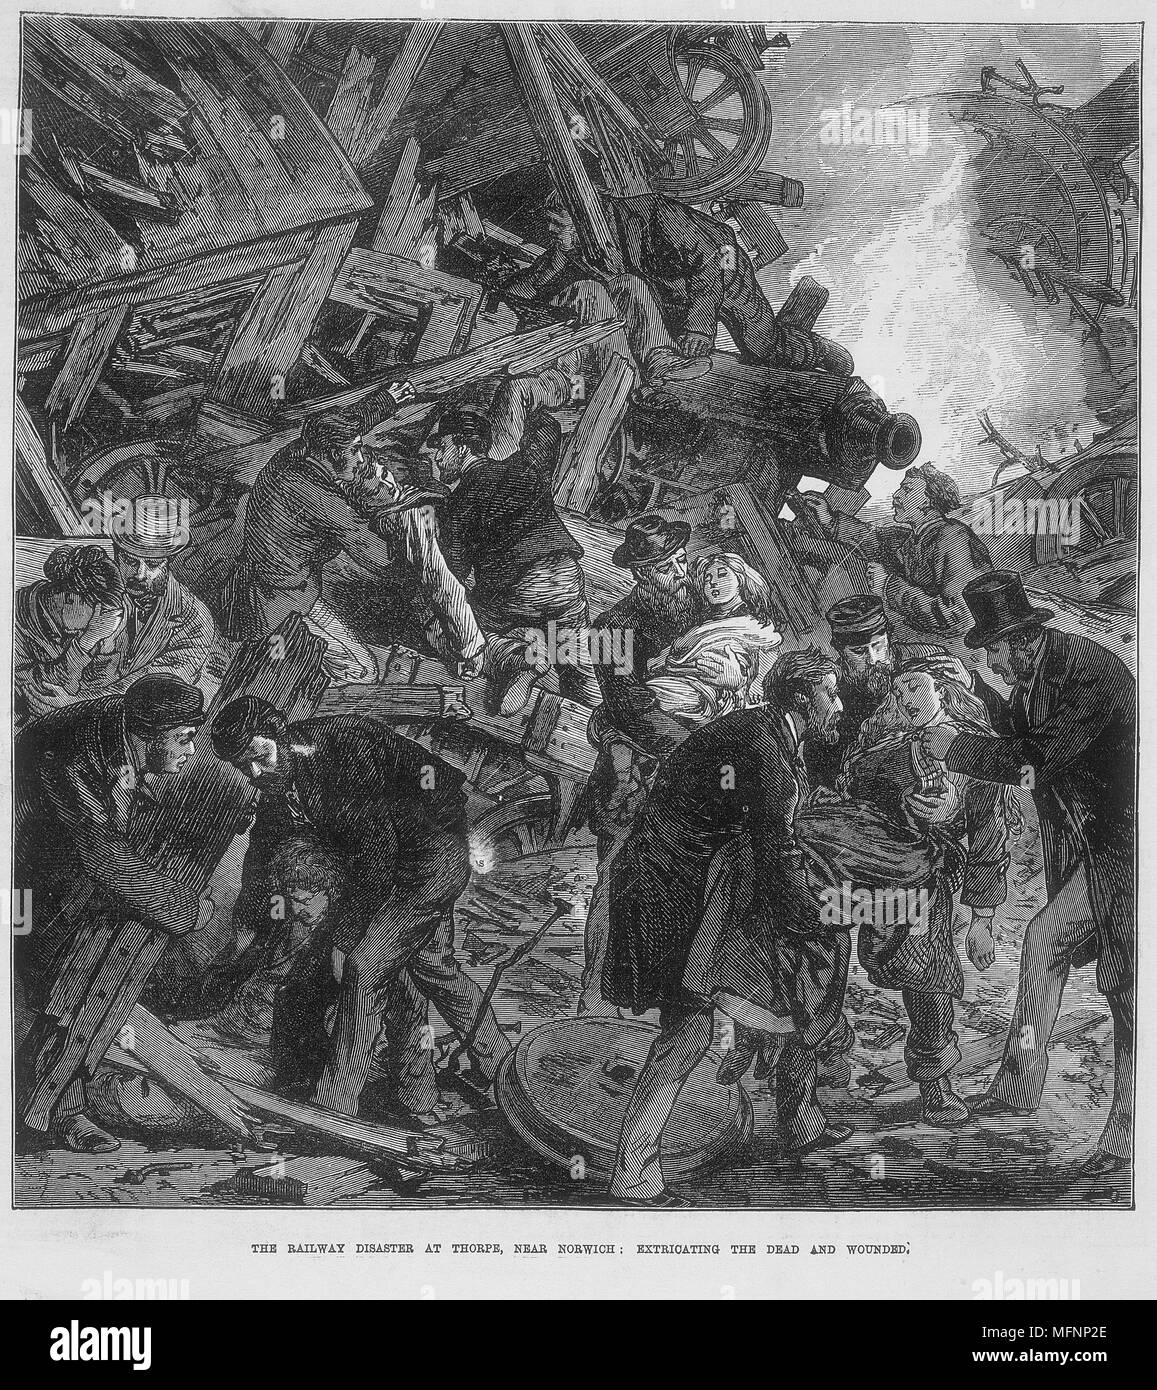 Extricating the dead and wounded from the wreckage of the railway accident at Thorpe near Norwich, Norfolk. September 1874. Stock Photo